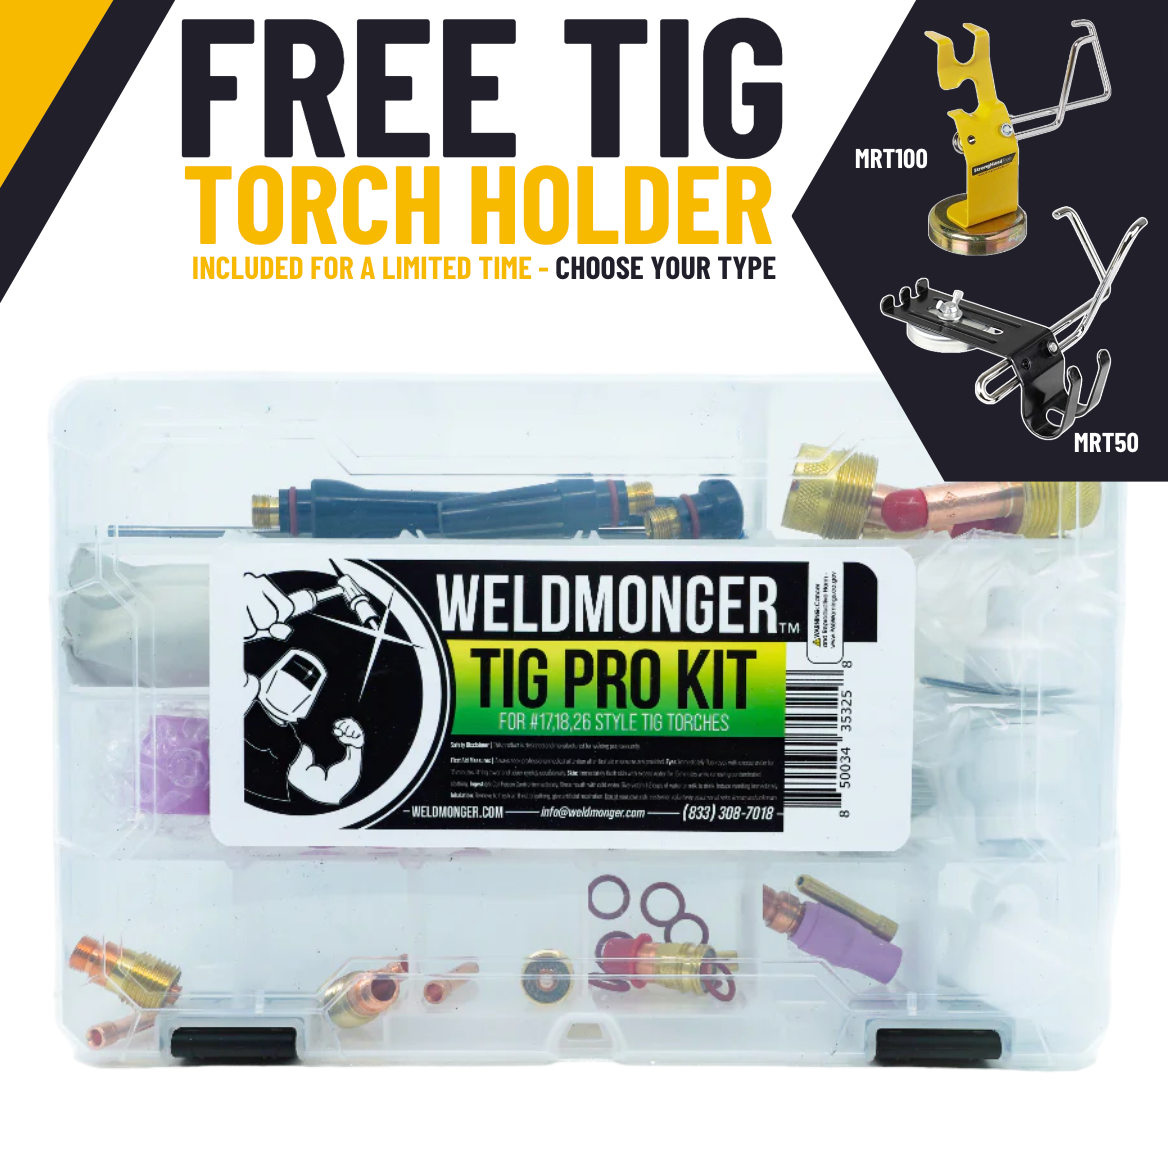 WELDMONGER® TIG PRO KIT FOR 17/18/26 STYLE TORCHES, Stronghand Ready Rest Included For A Limited Time